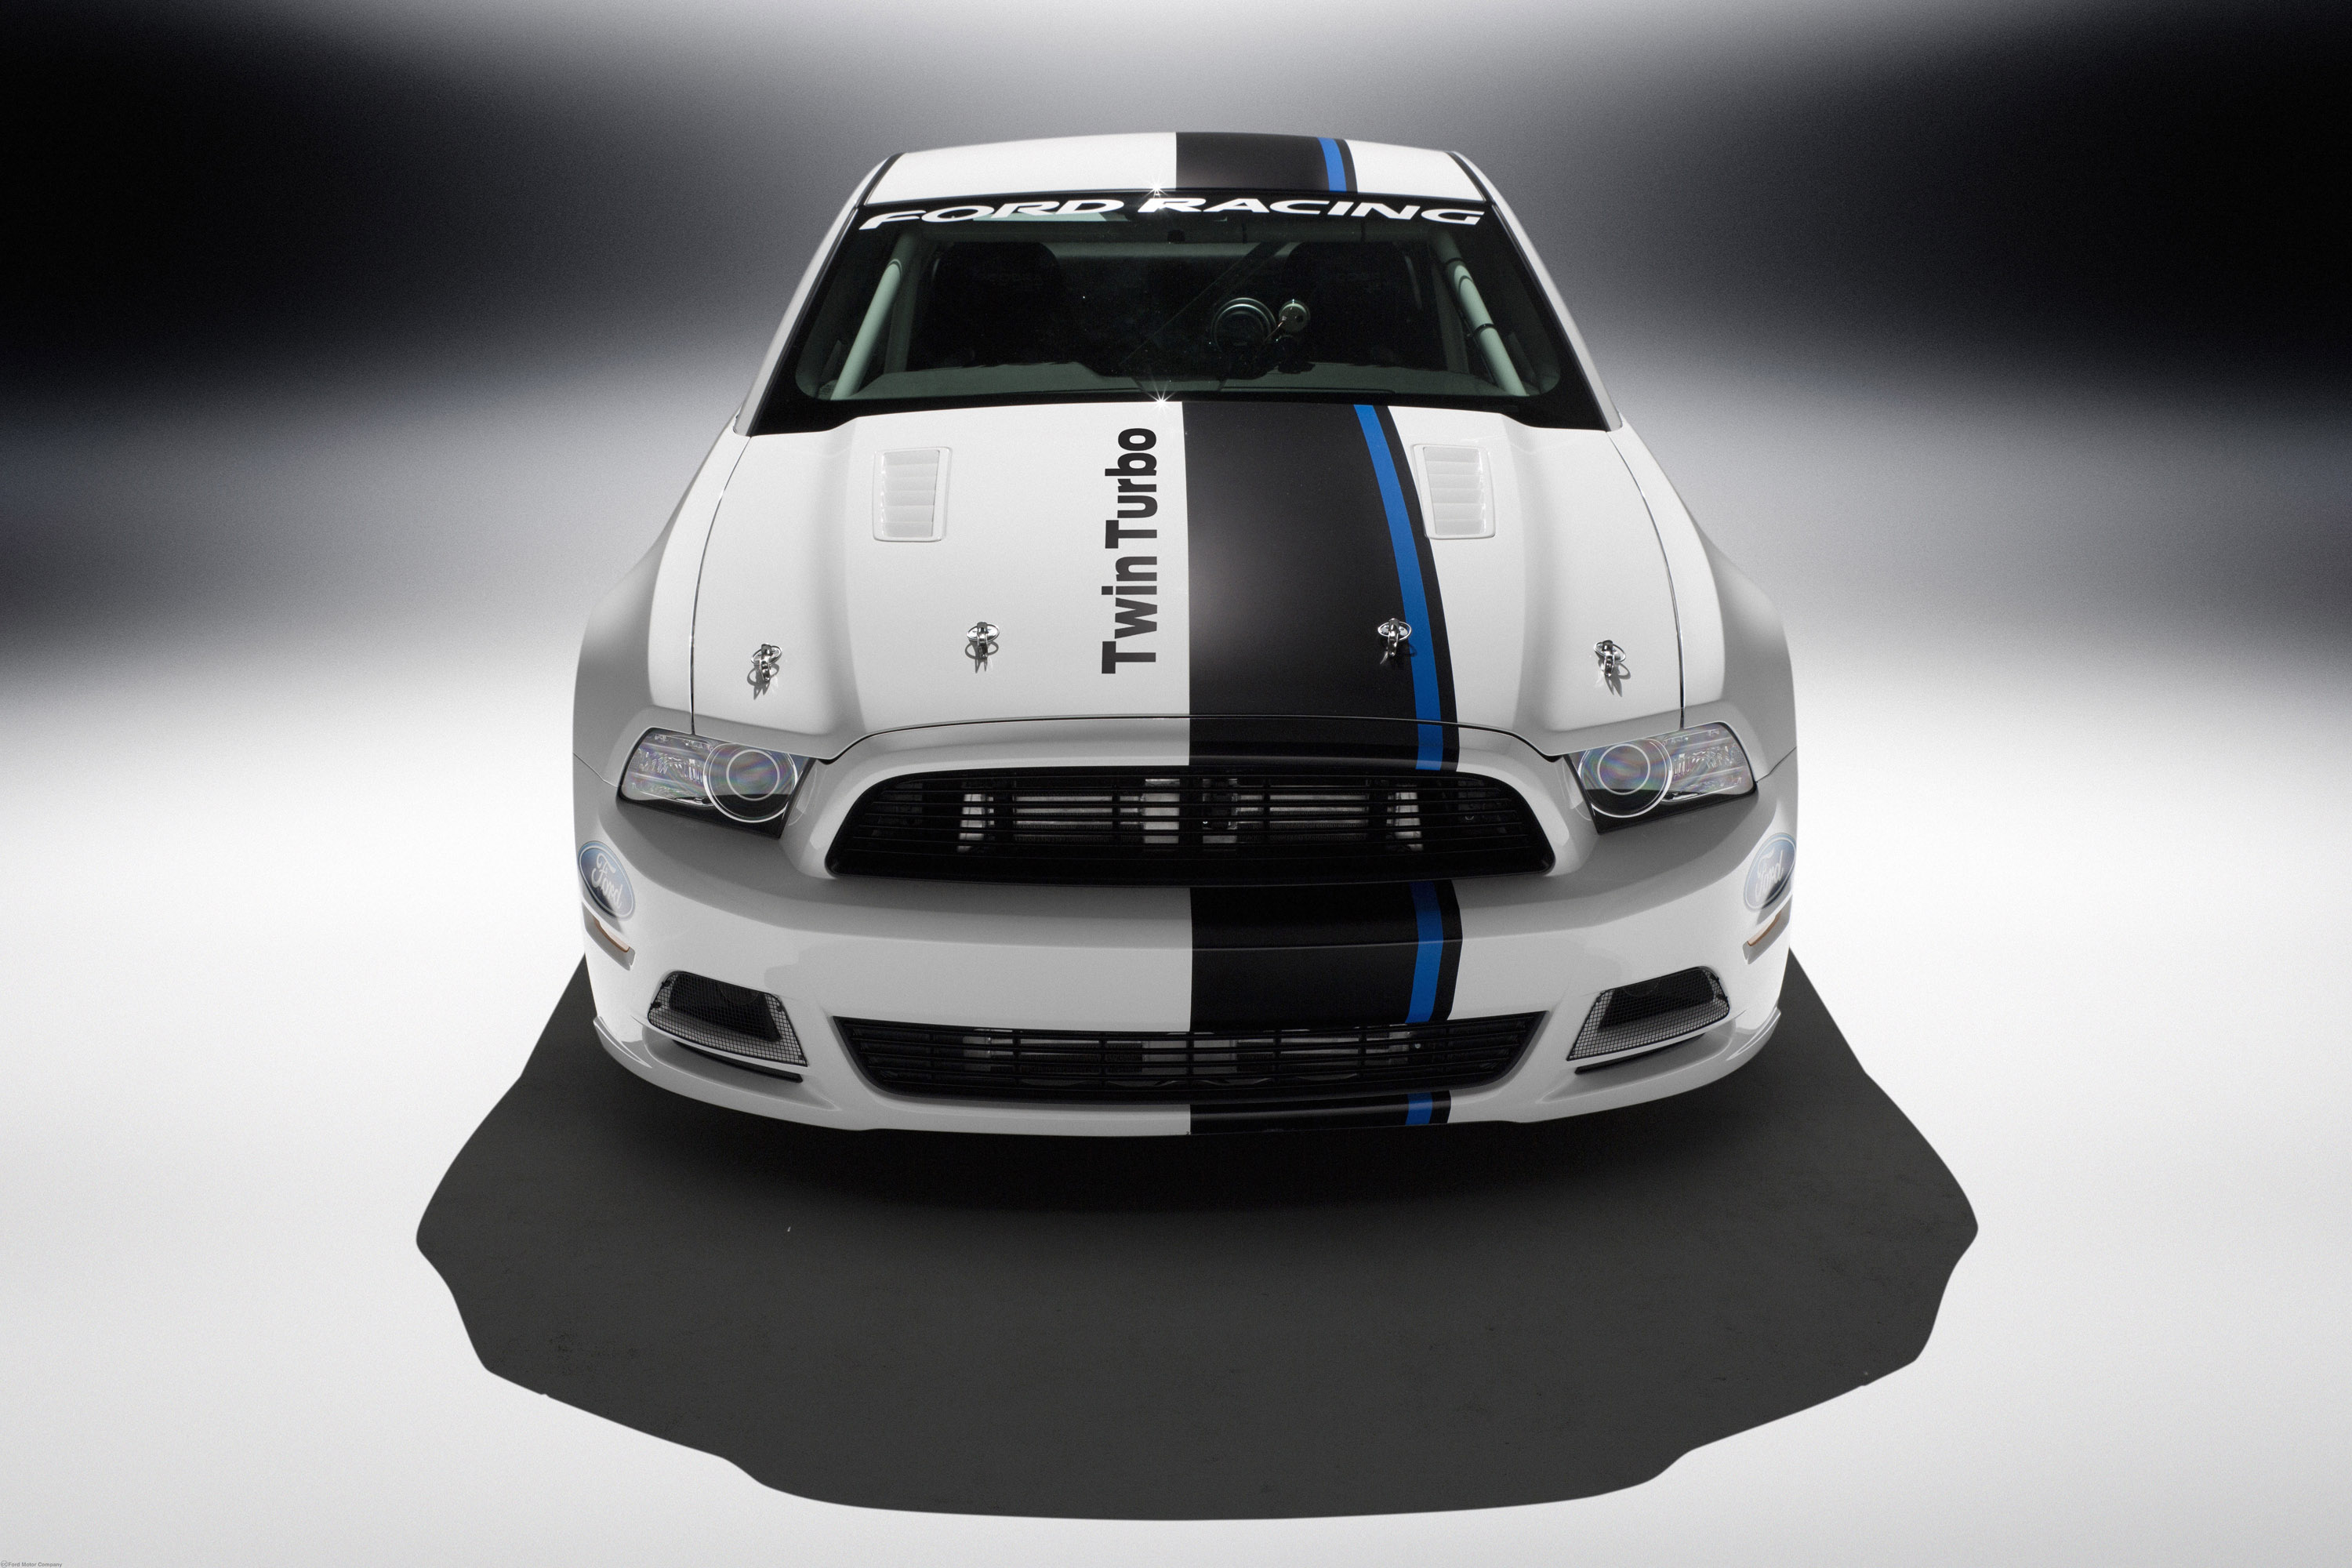 2013, Ford, Mustang, Cobra, Jet, Twin turbo, Concept, Race, Racing, Hot, Rod, Rods, Muscle Wallpaper